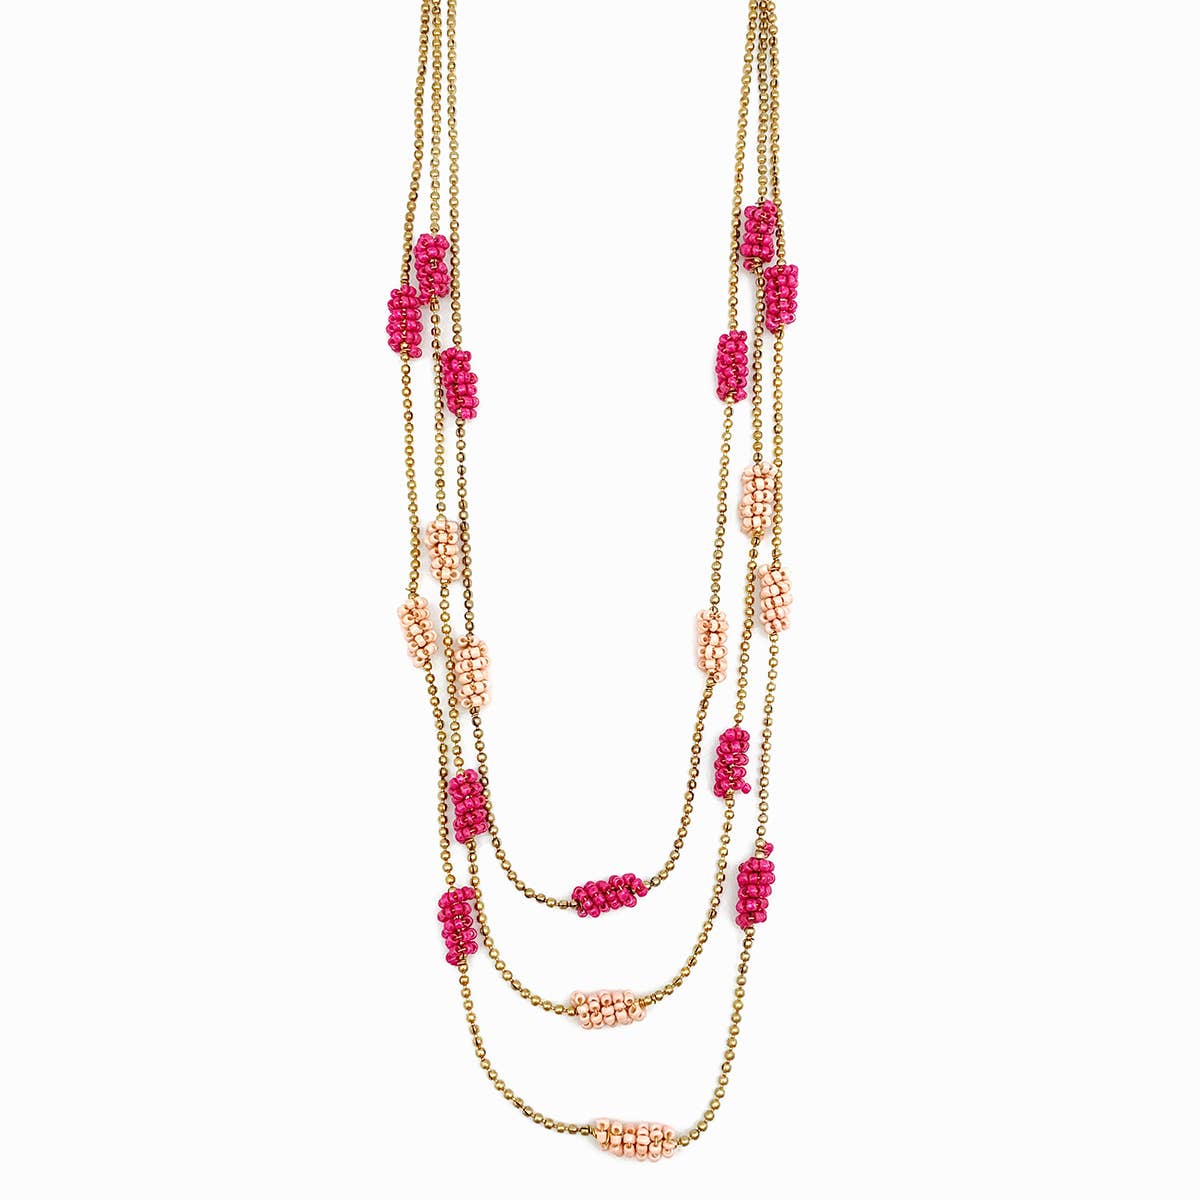 Sachi Cerise Collection Necklace - Three Layer Beaded Tubes